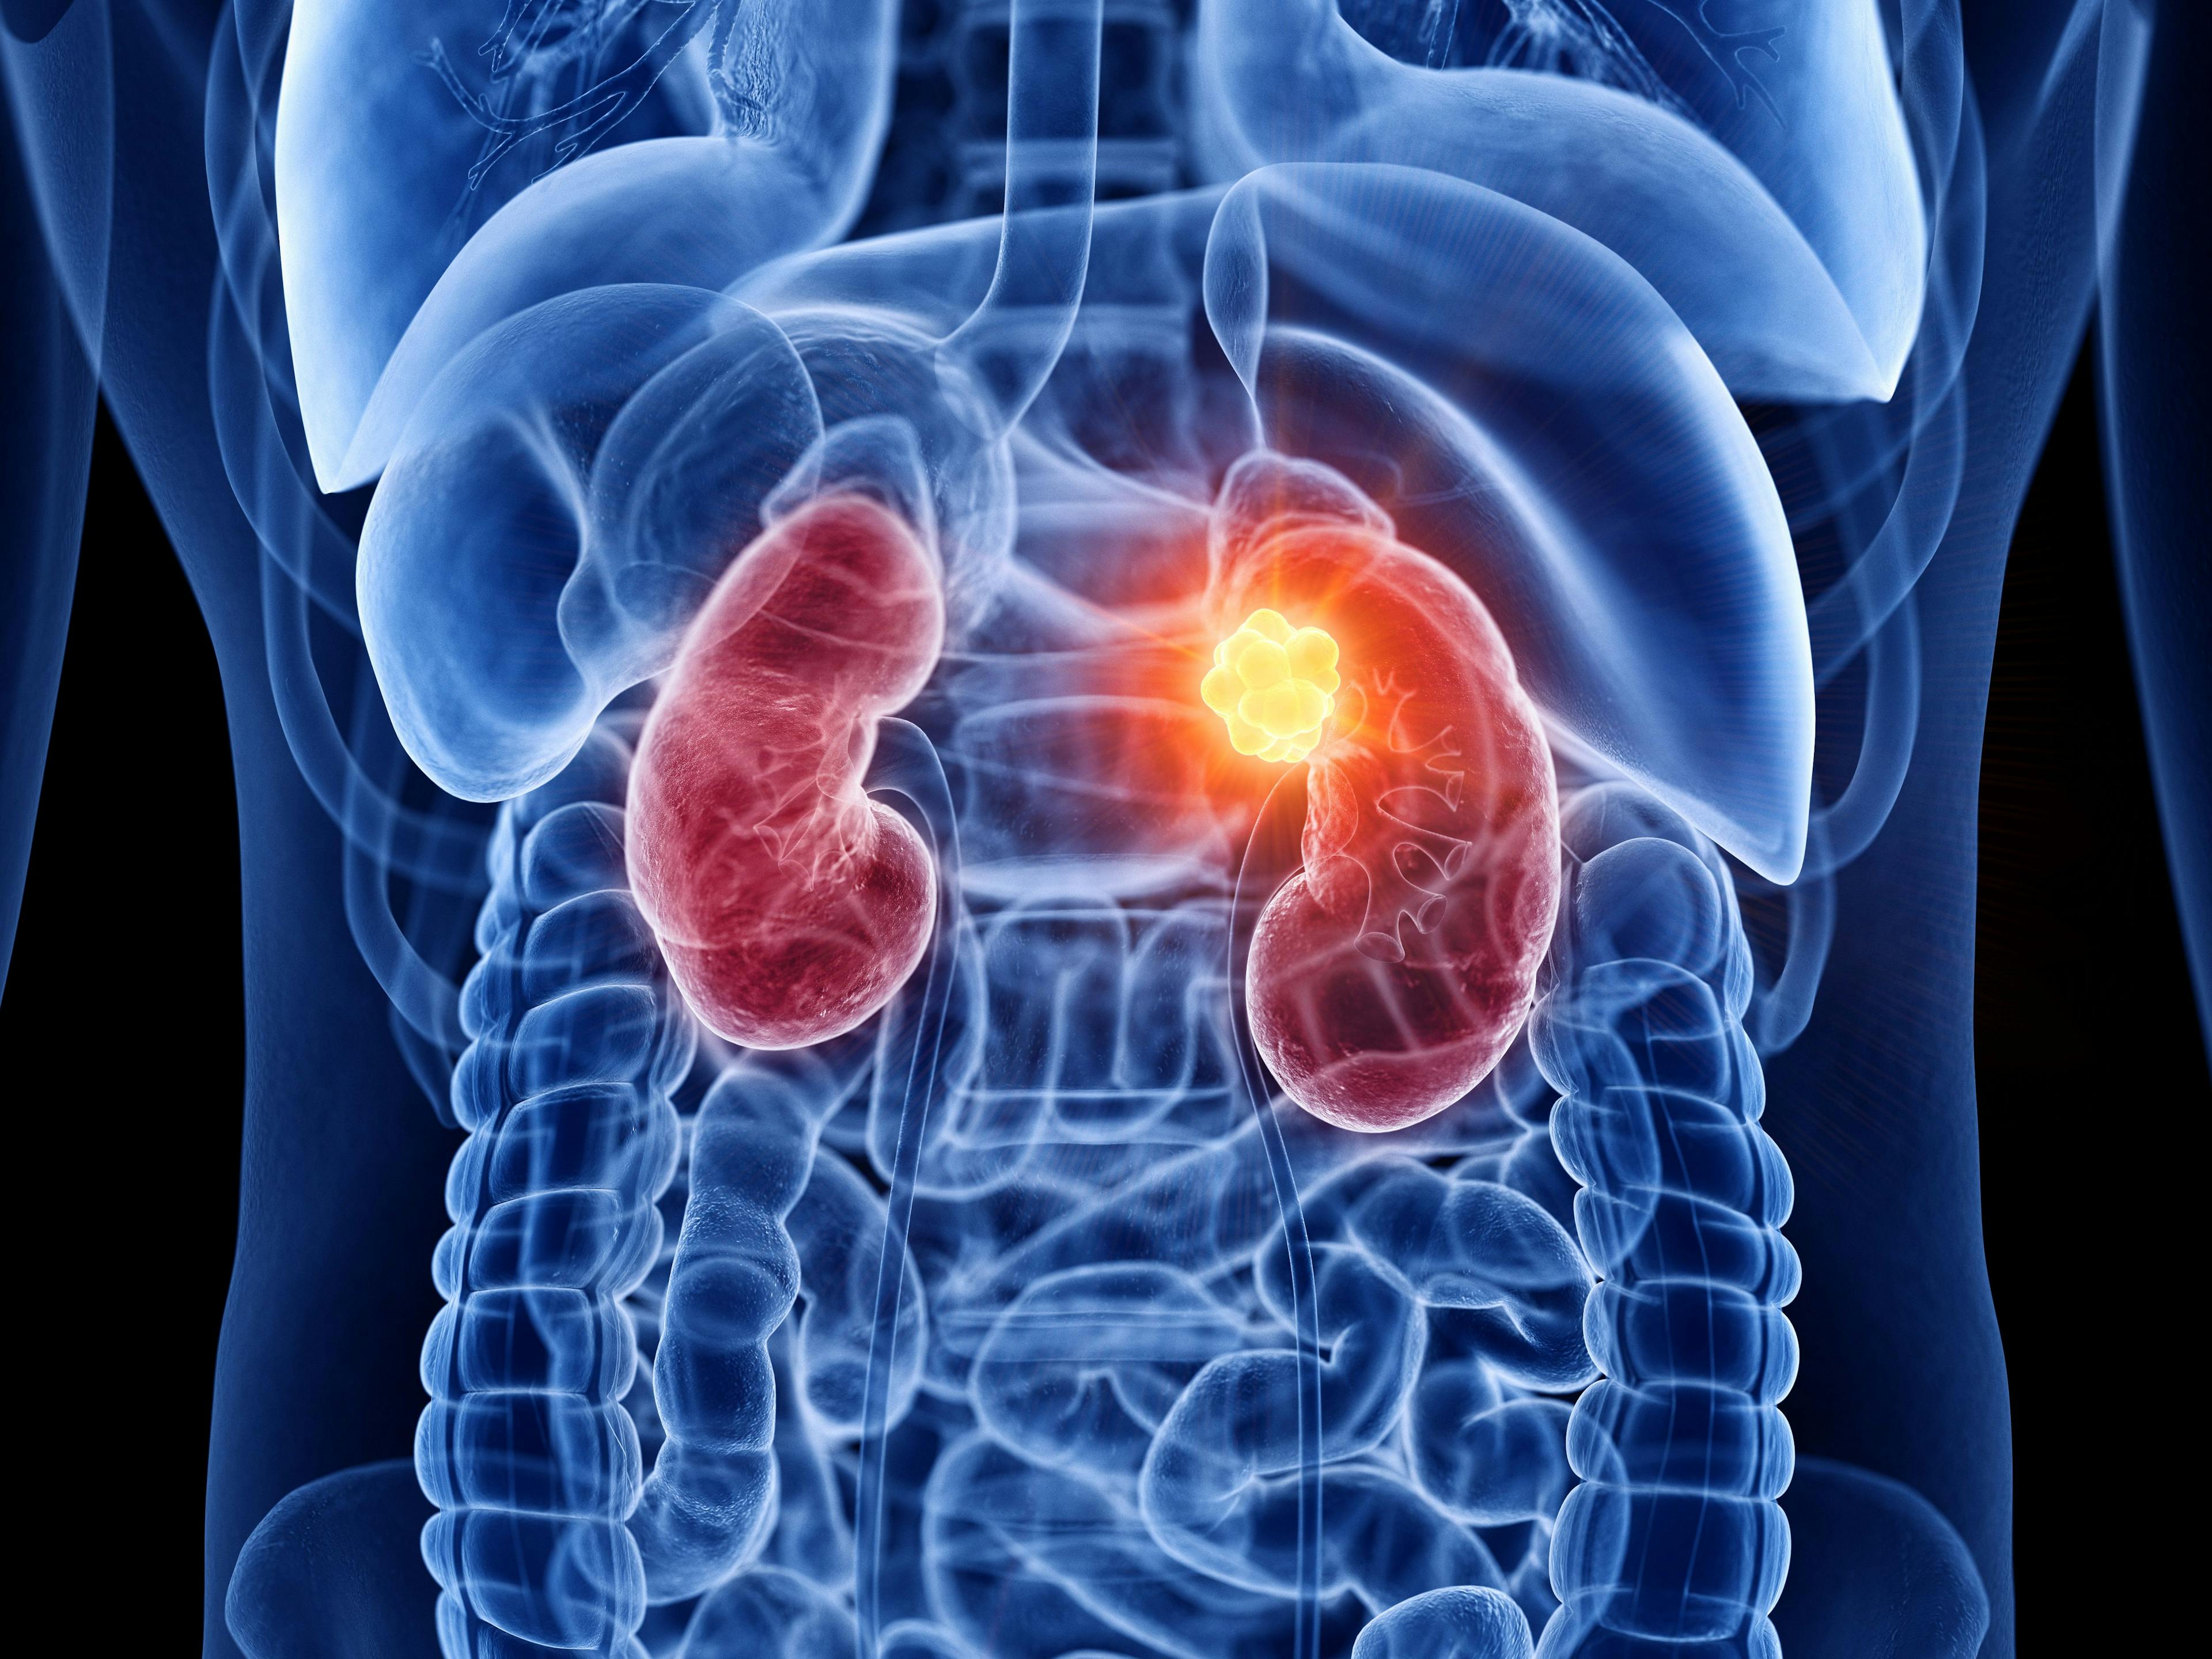 3D rendering of renal cell carcinoma: ©SciePro - stock.adobe.com